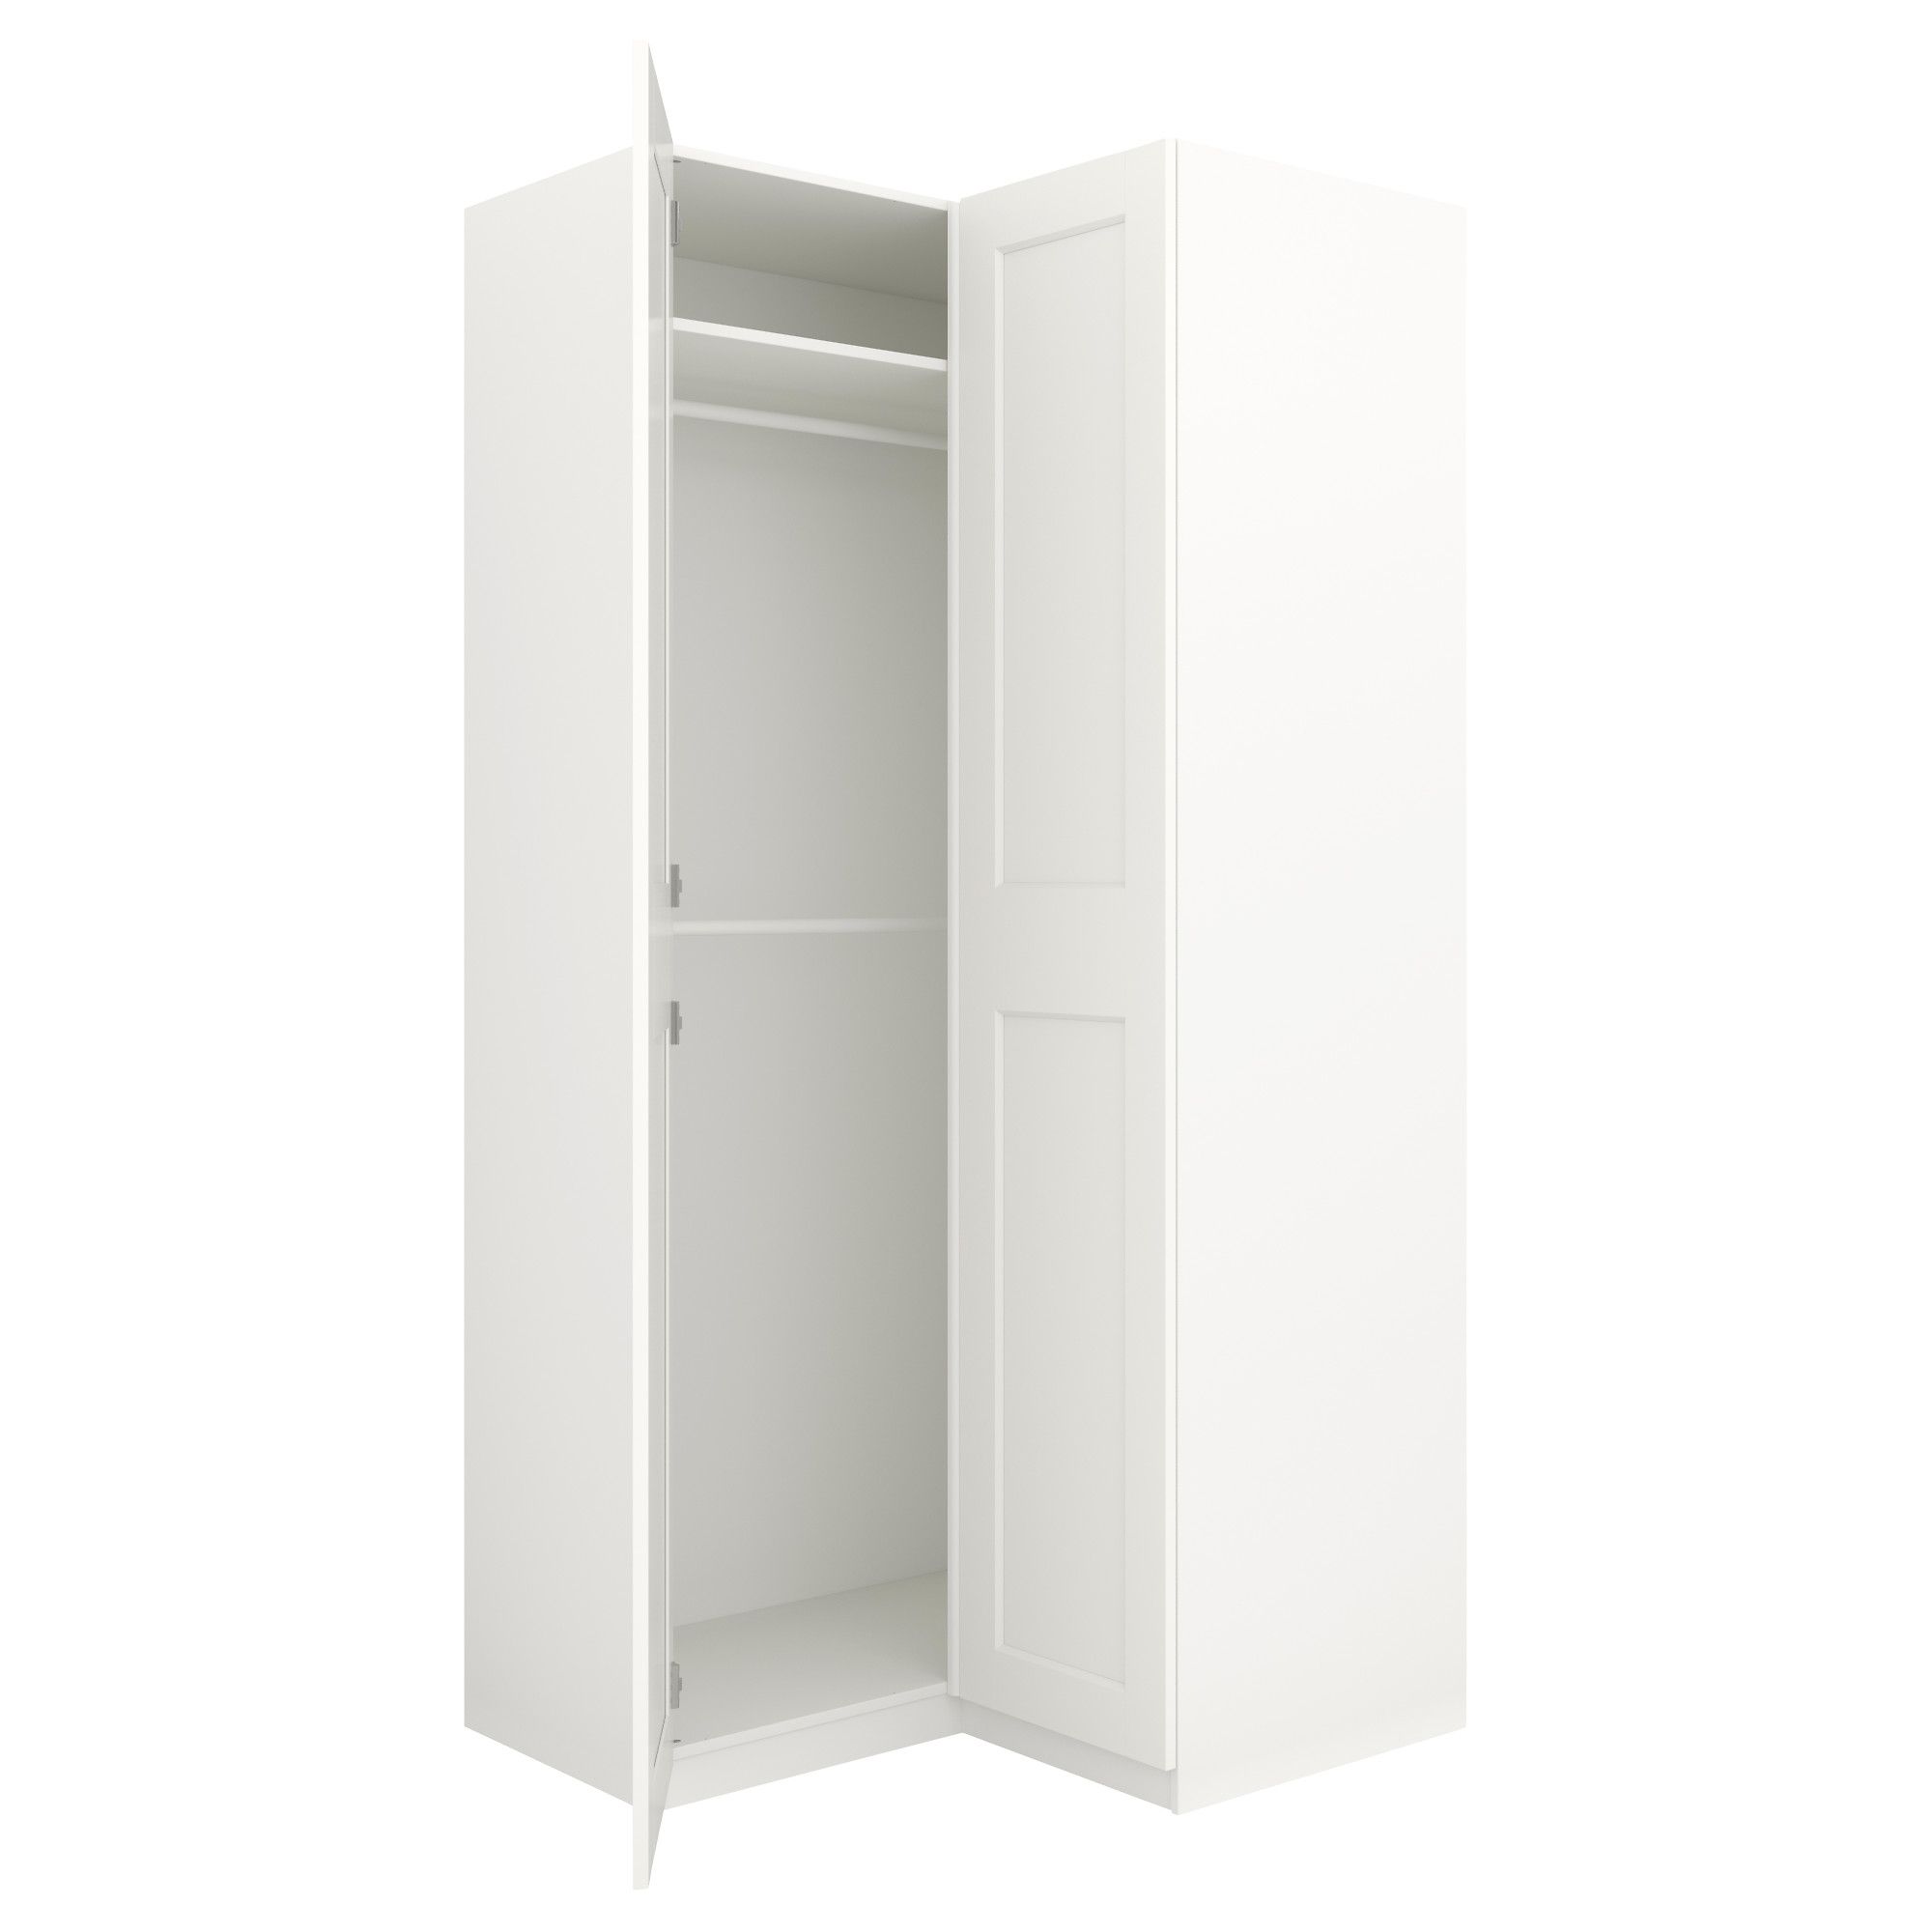 Cheap Corner Wardrobes Intended For Famous Pax Corner Wardrobe – Ikea (View 1 of 15)